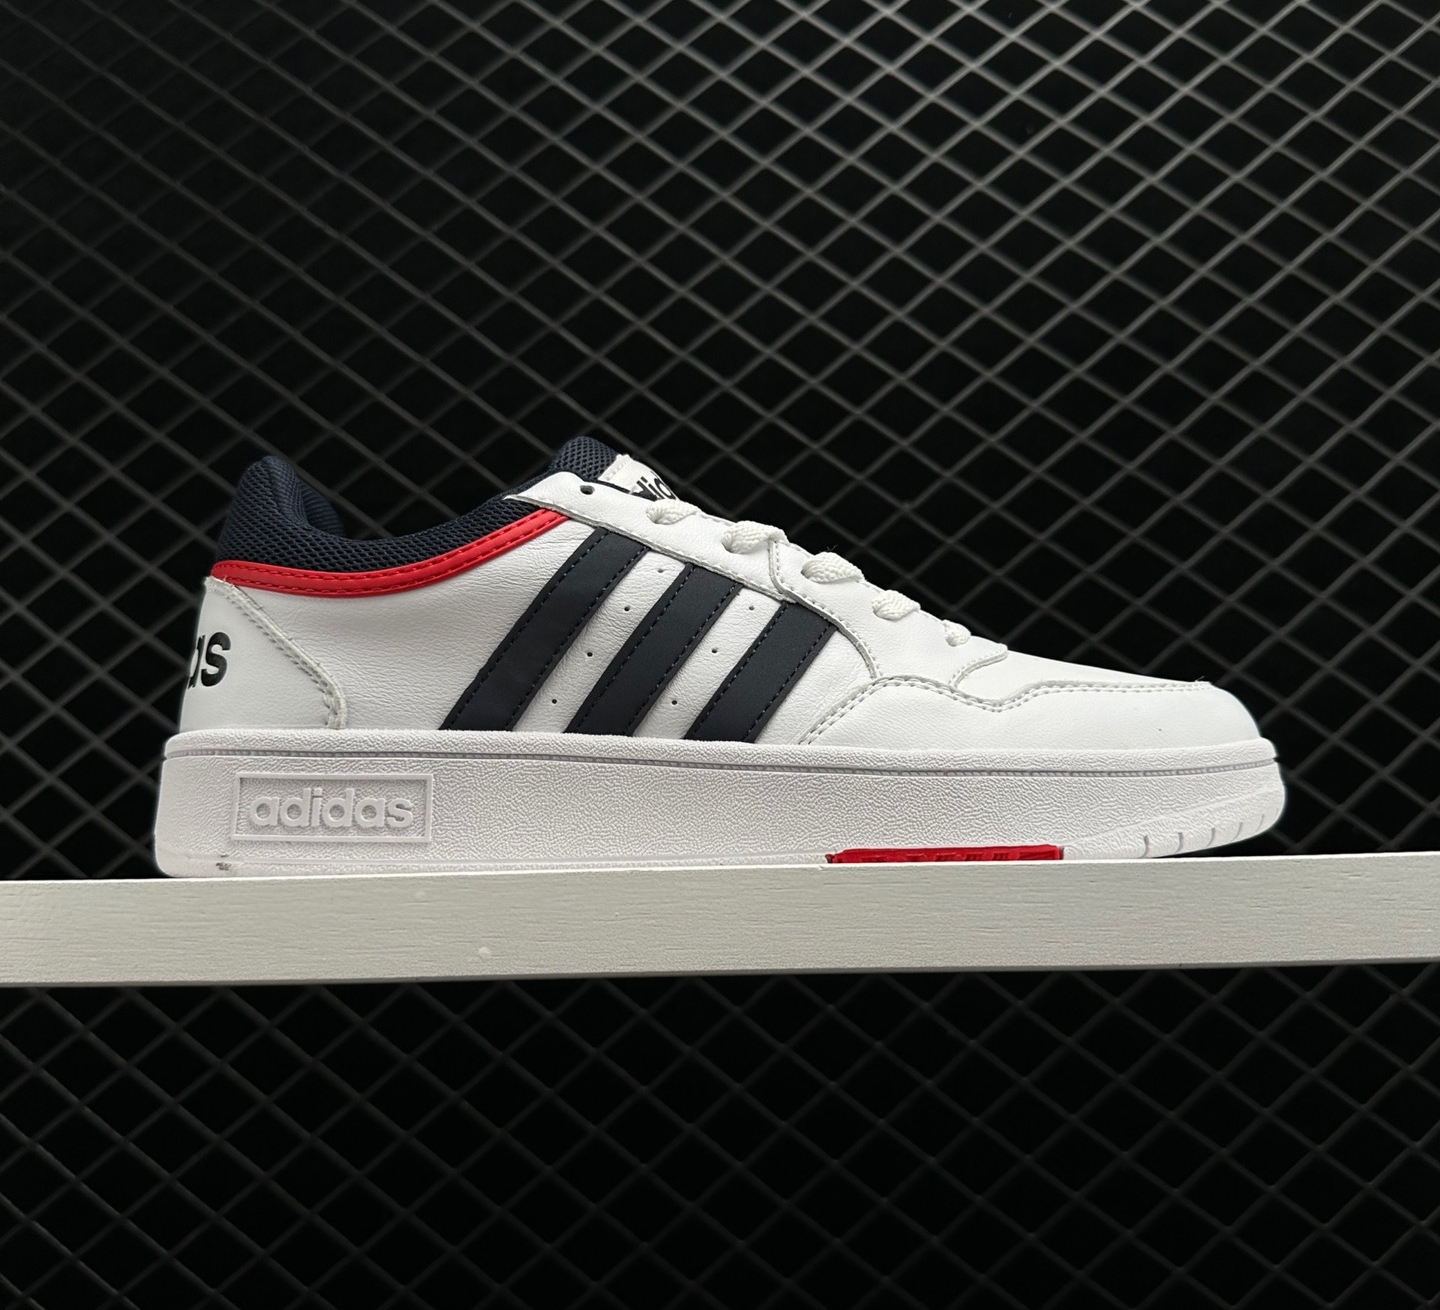 Adidas Hoops 3.0 Low Classic Vintage Shoes 'White Vivid Red' GY5427 - Fashionable Retro Footwear for the Modern Individual